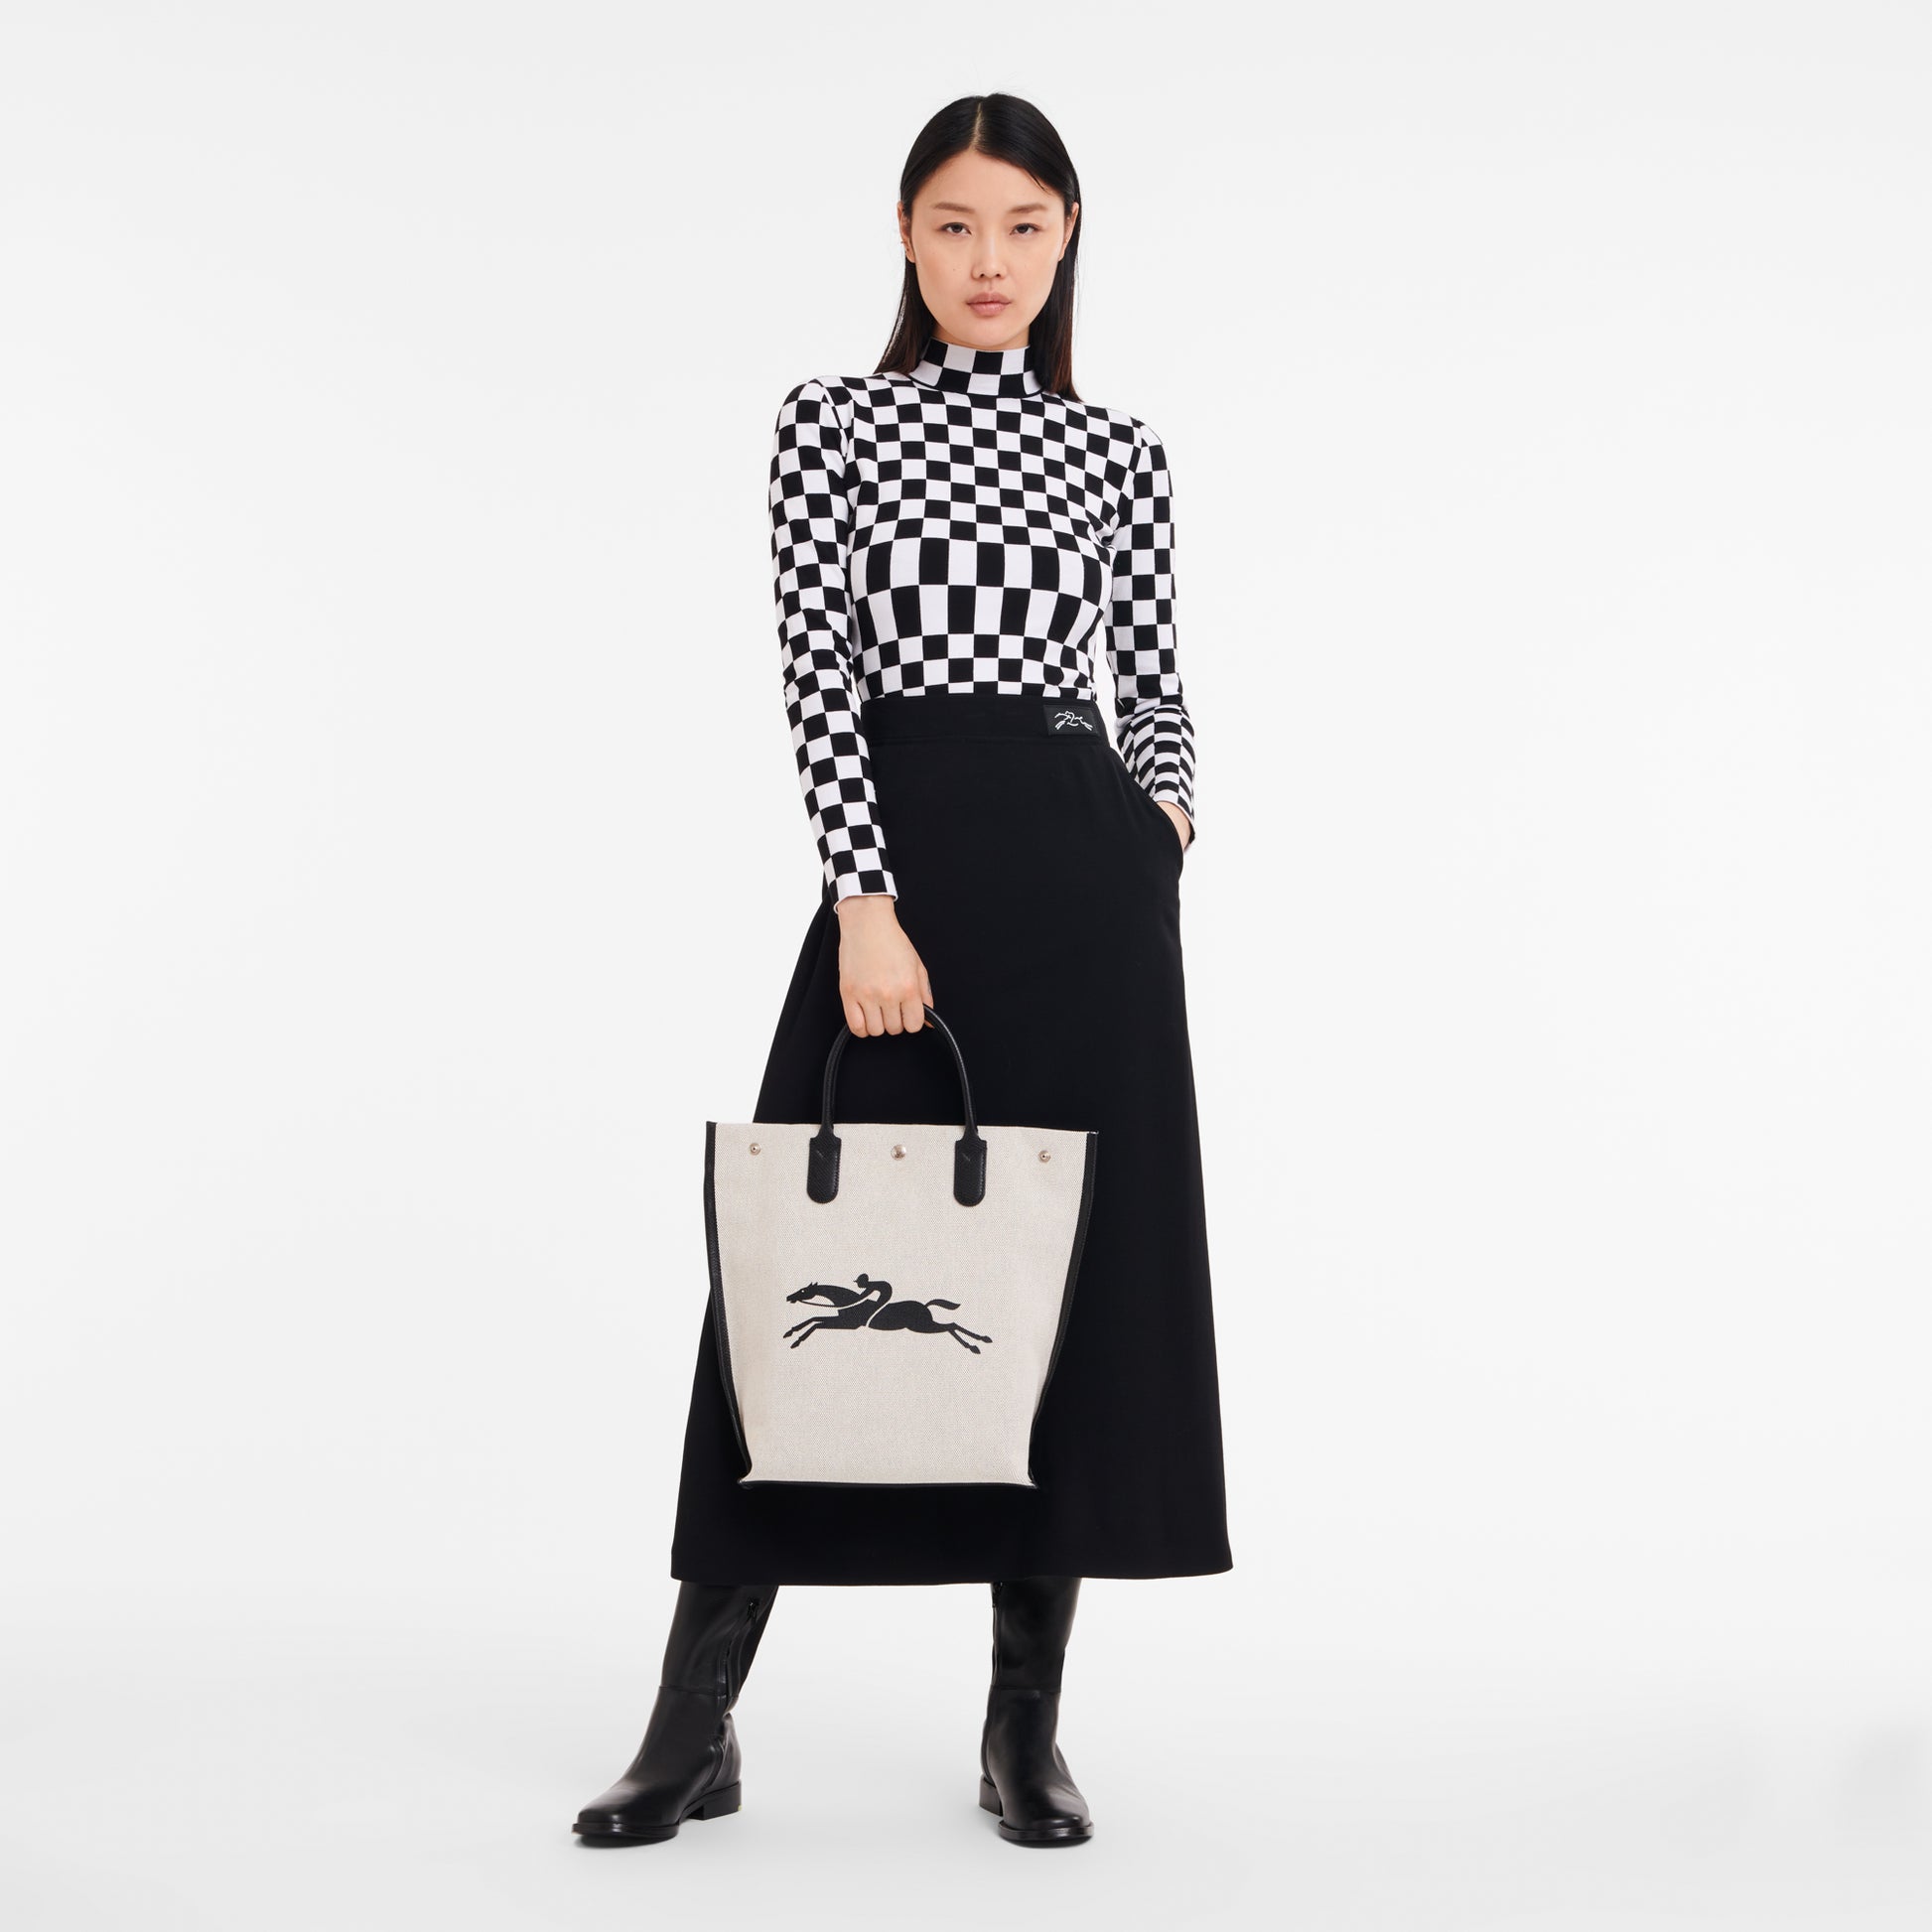 Canvas Extra Large Tote Bag - Unisex Bags & Accessories